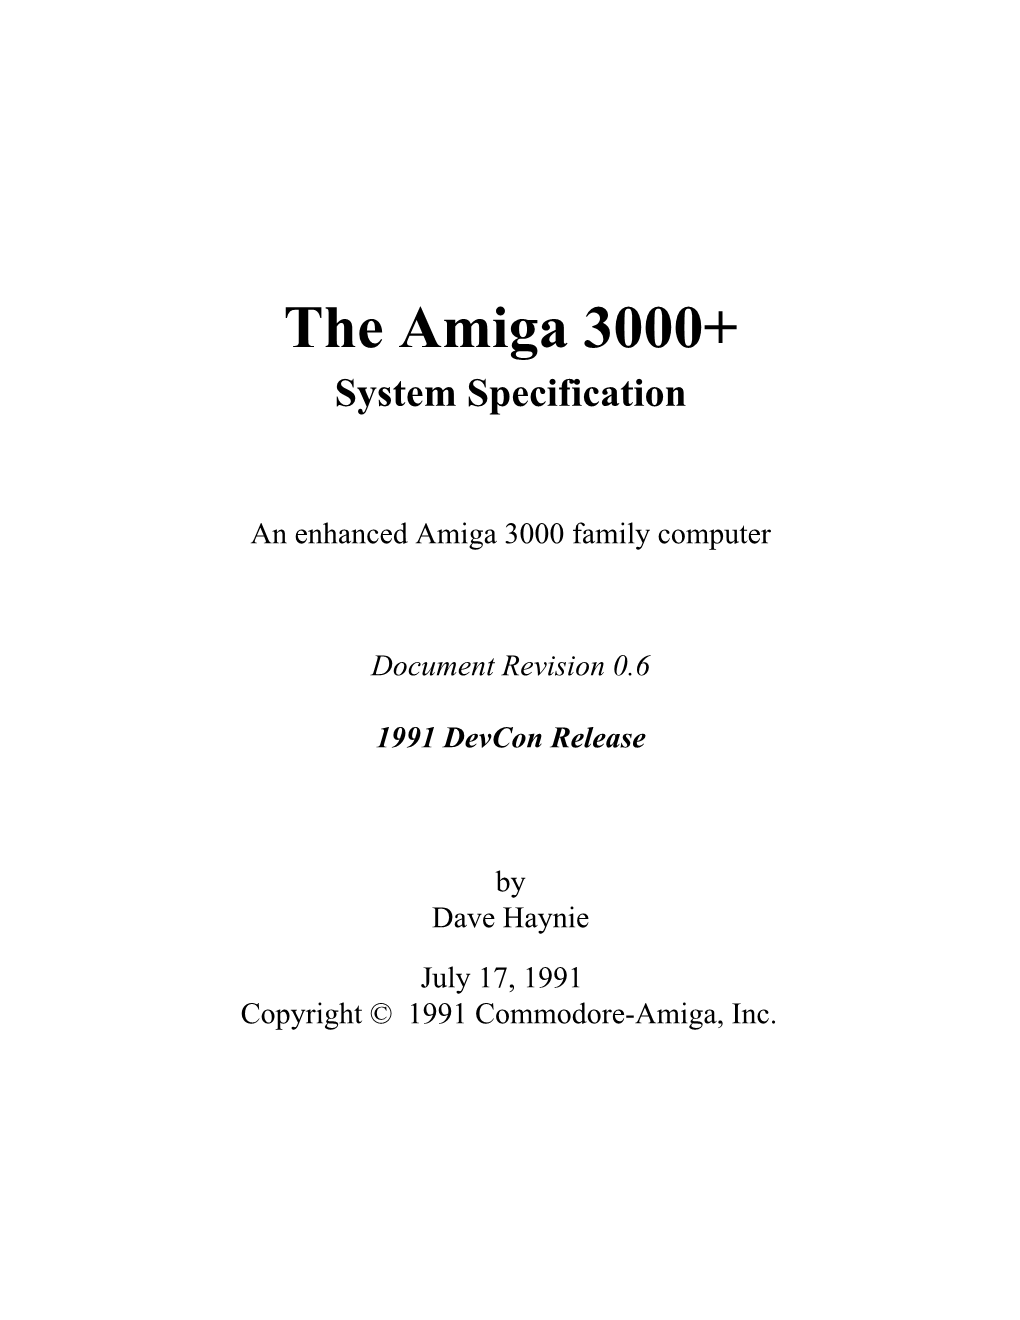 The Amiga 3000+ System Specification